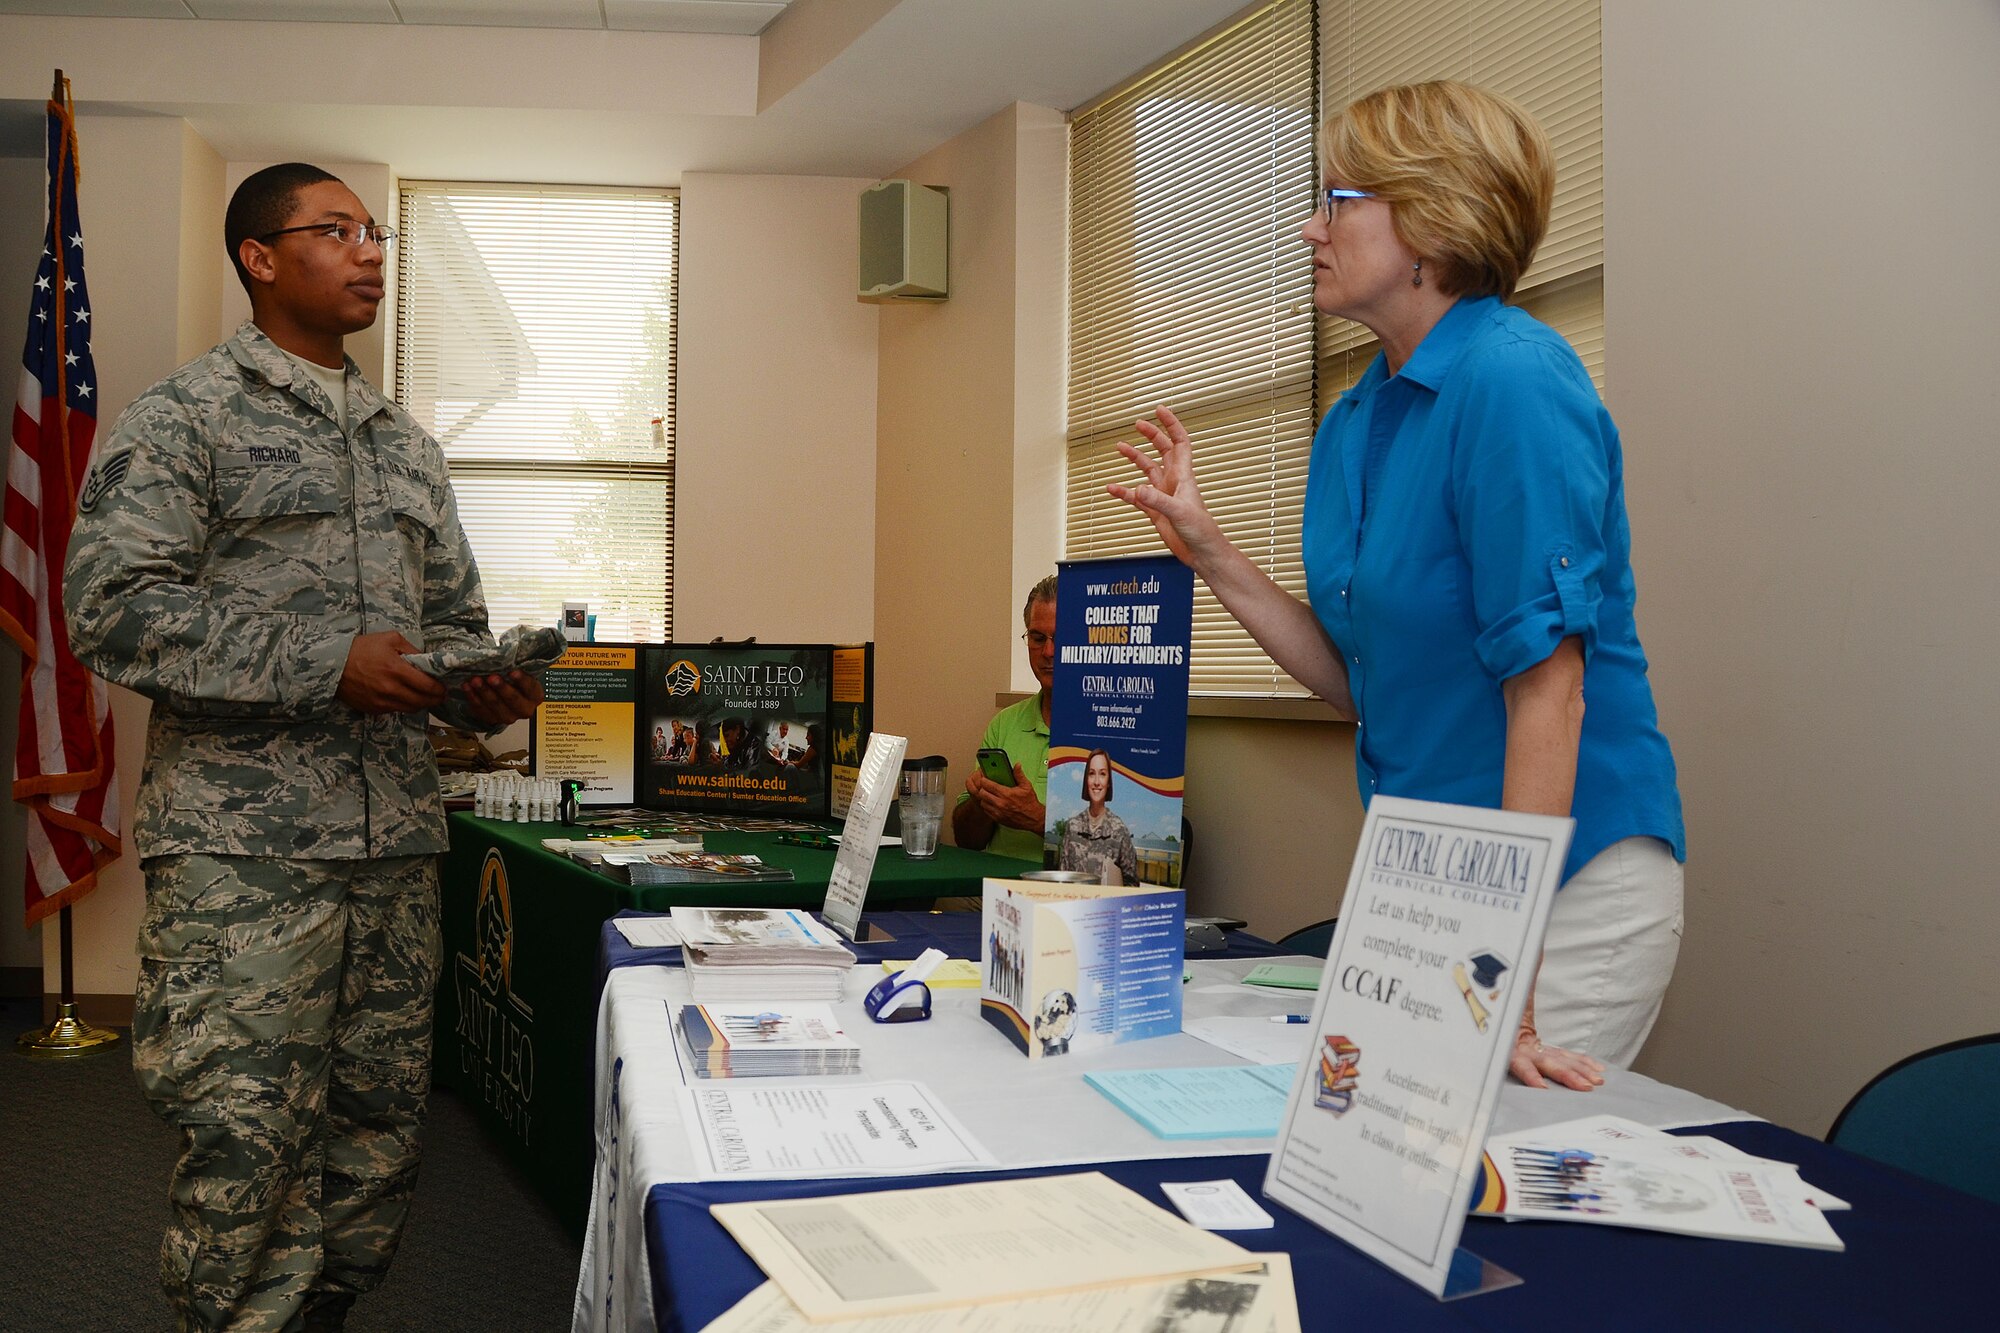 U.S. Air Force Staff Sgt. Eric Richard, assigned to the 169th Fighter Wing, receives education information from Carolyn Adamczyk, a military programs coordinator for Central Carolina Technical College at an education fair on McEntire Joint National Guard Base, S.C. July 12, 2014.  The 169th Fighter Wing sponsored the education fair to encourage Airmen to progress with their technical degree.   (U.S. Air National Guard photo by Airman 1st Class Ashleigh S. Pavelek/Released)